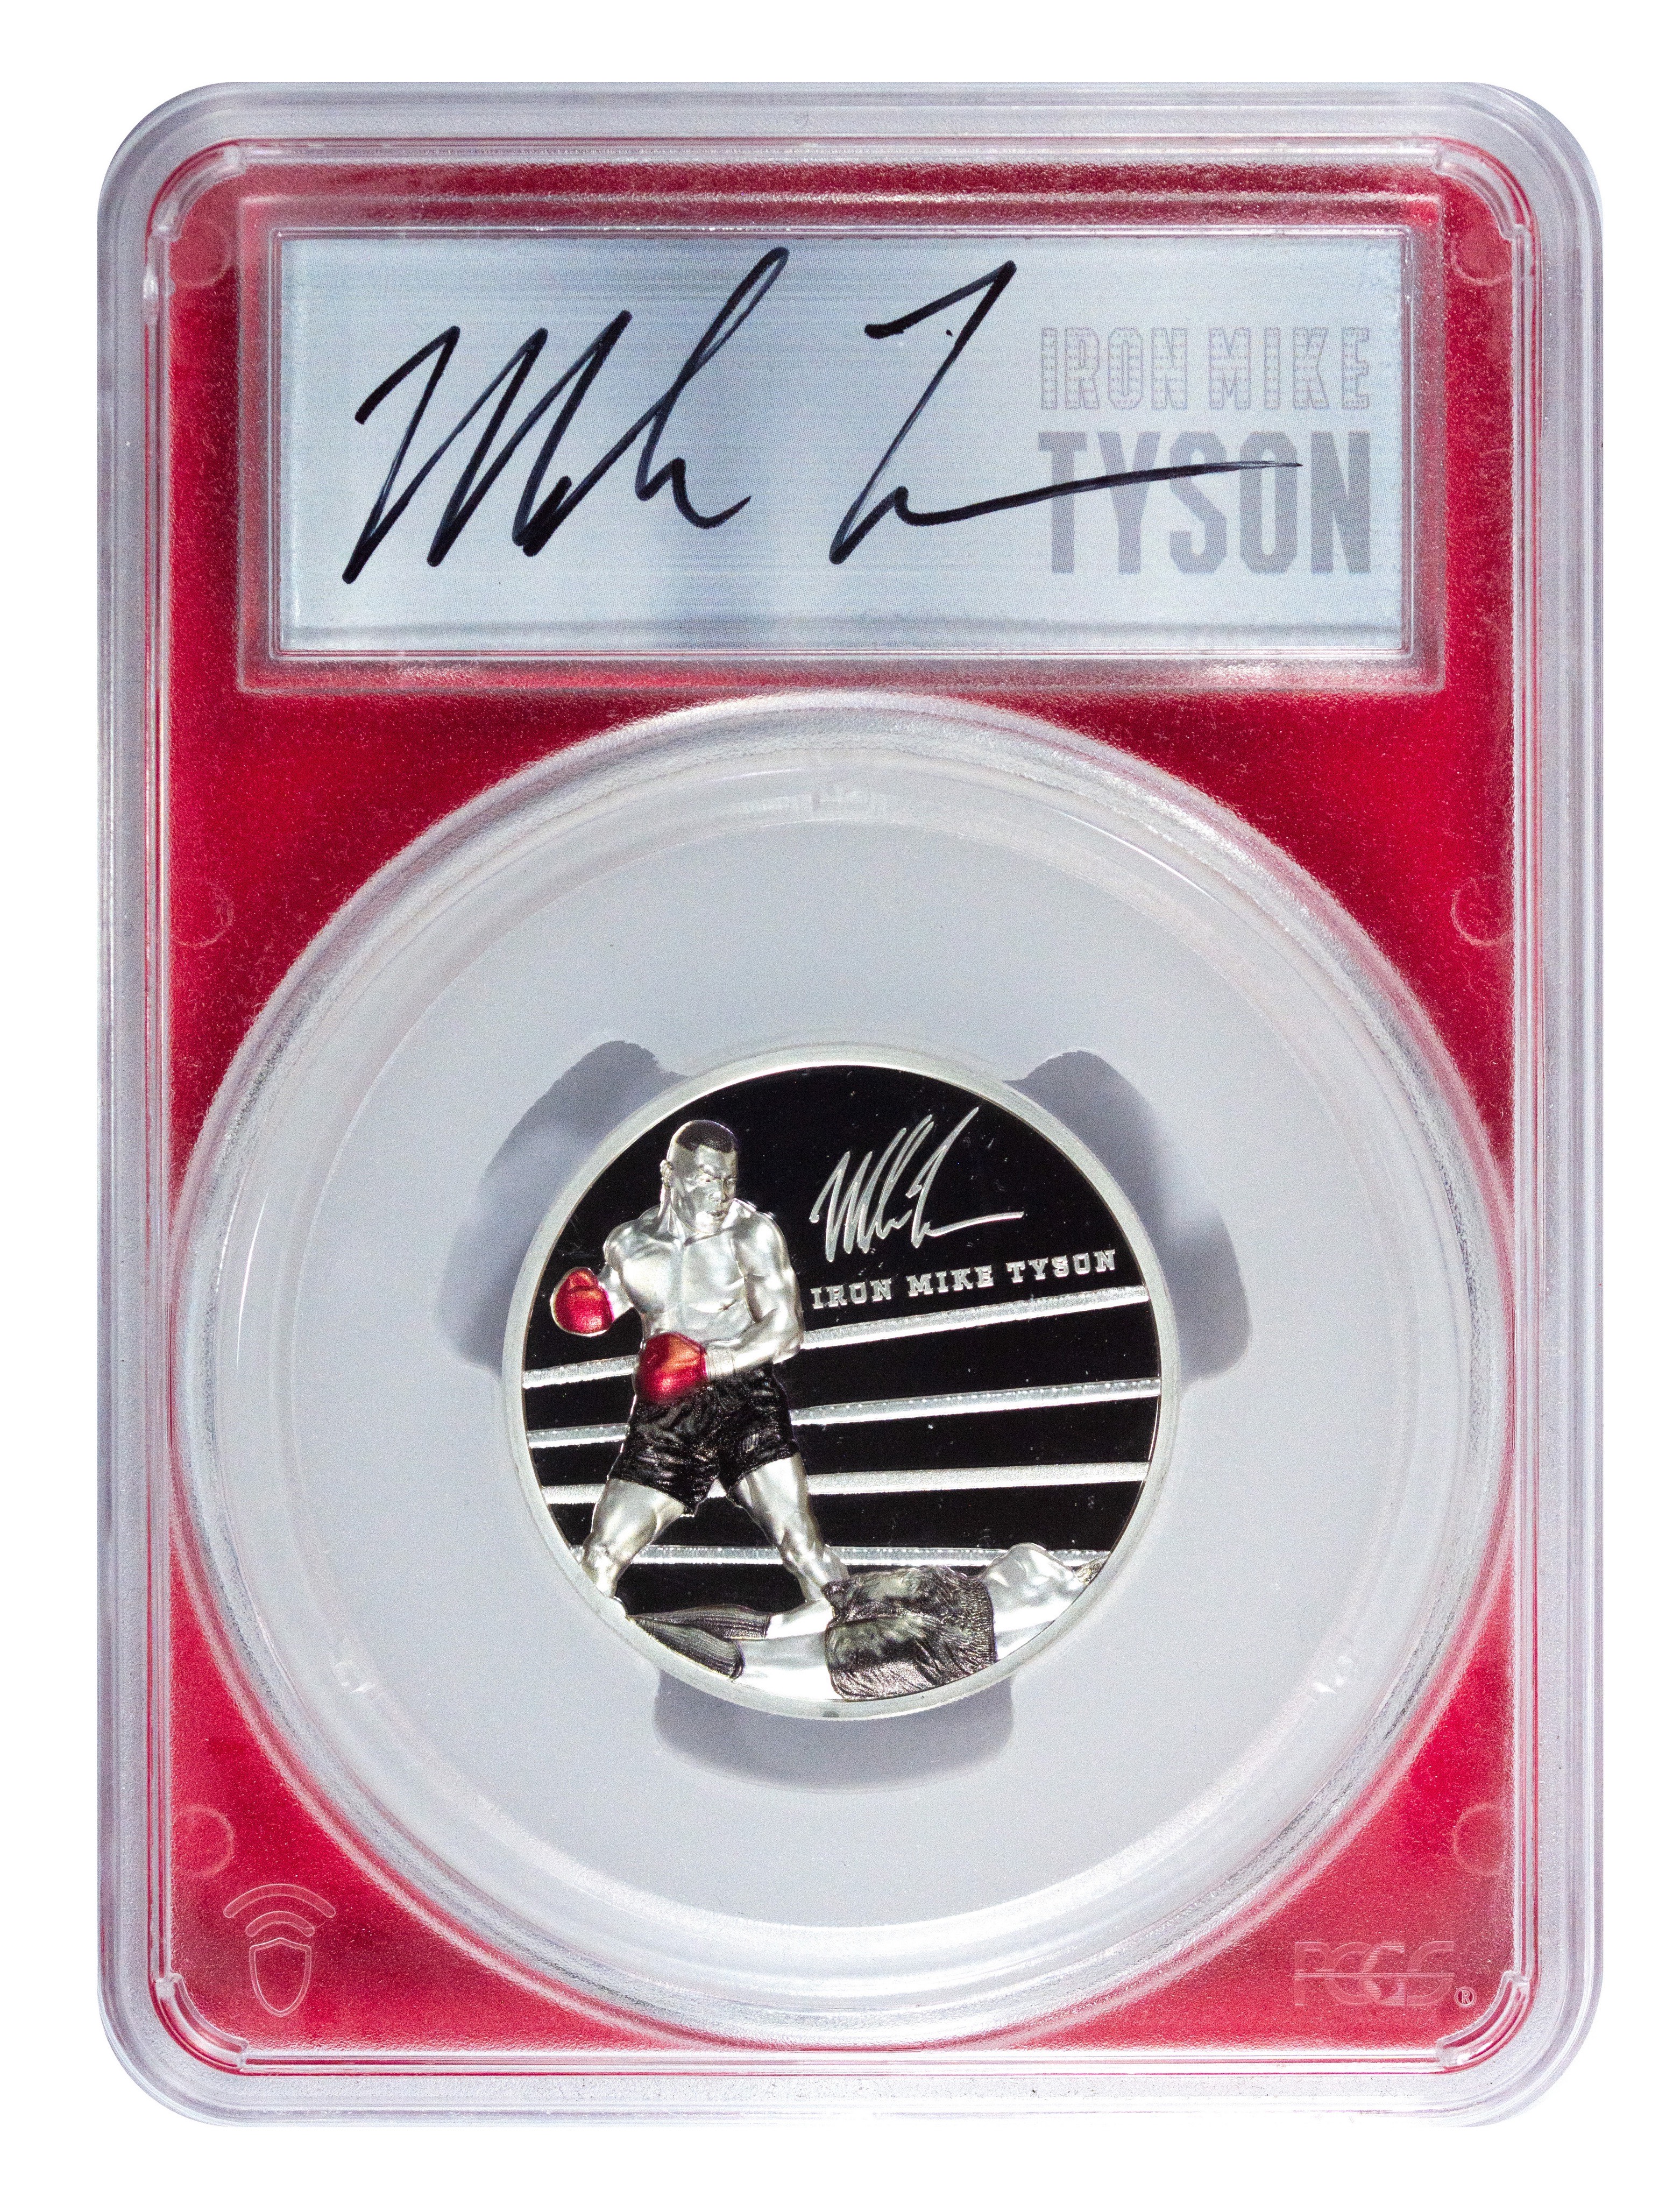 Mike Tyson 2 oz coin front